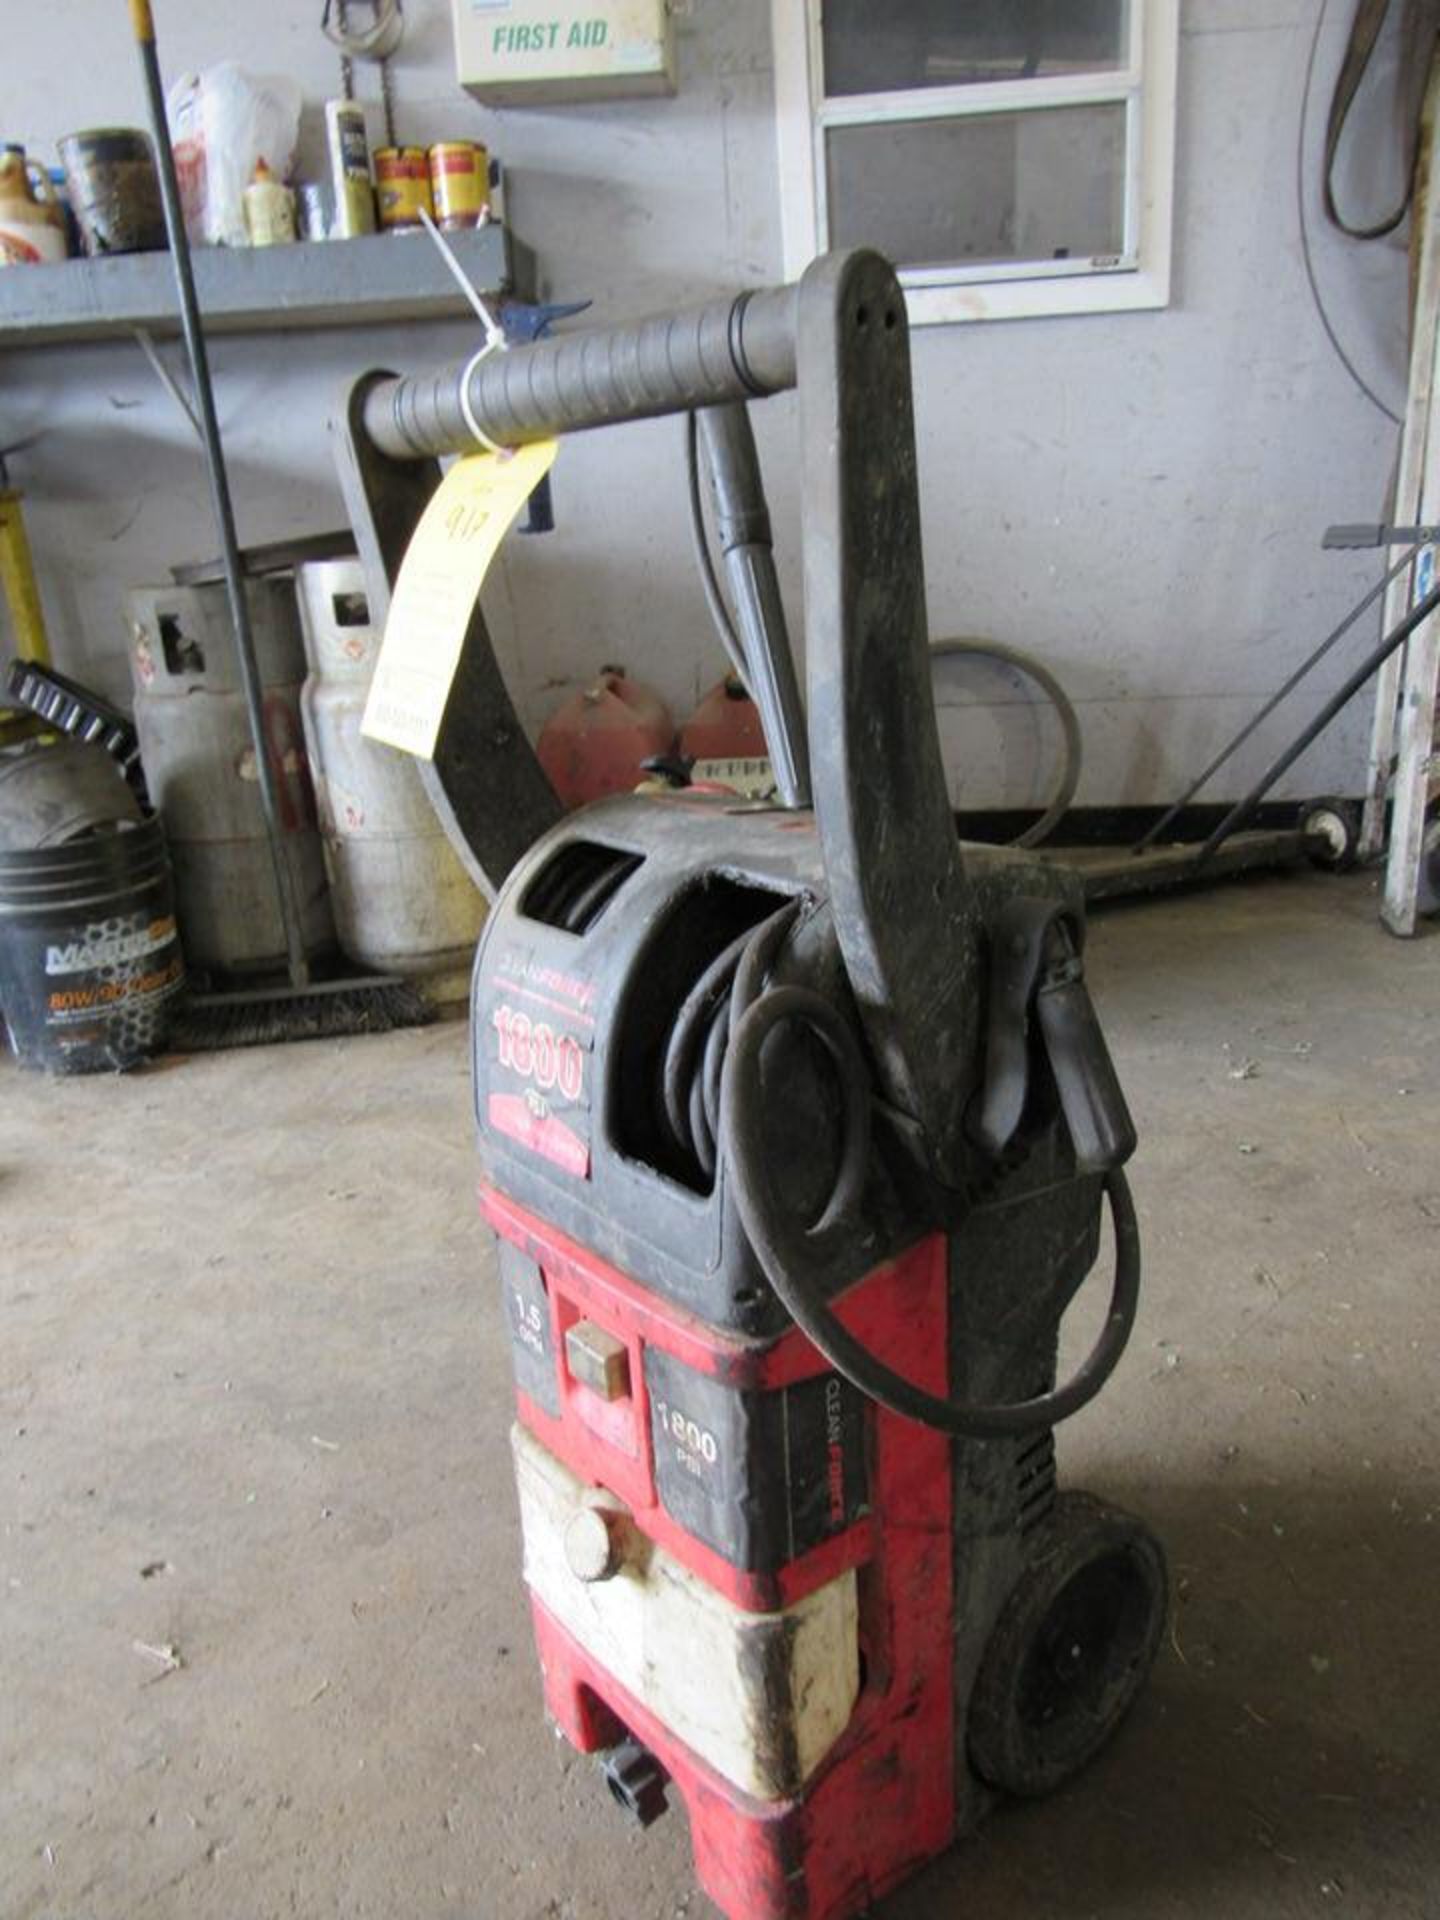 Clean Force 1800 Power Washer (LOCATION: 4214 Bluebonnet Drive, Houston, TX 77053) - Image 3 of 6